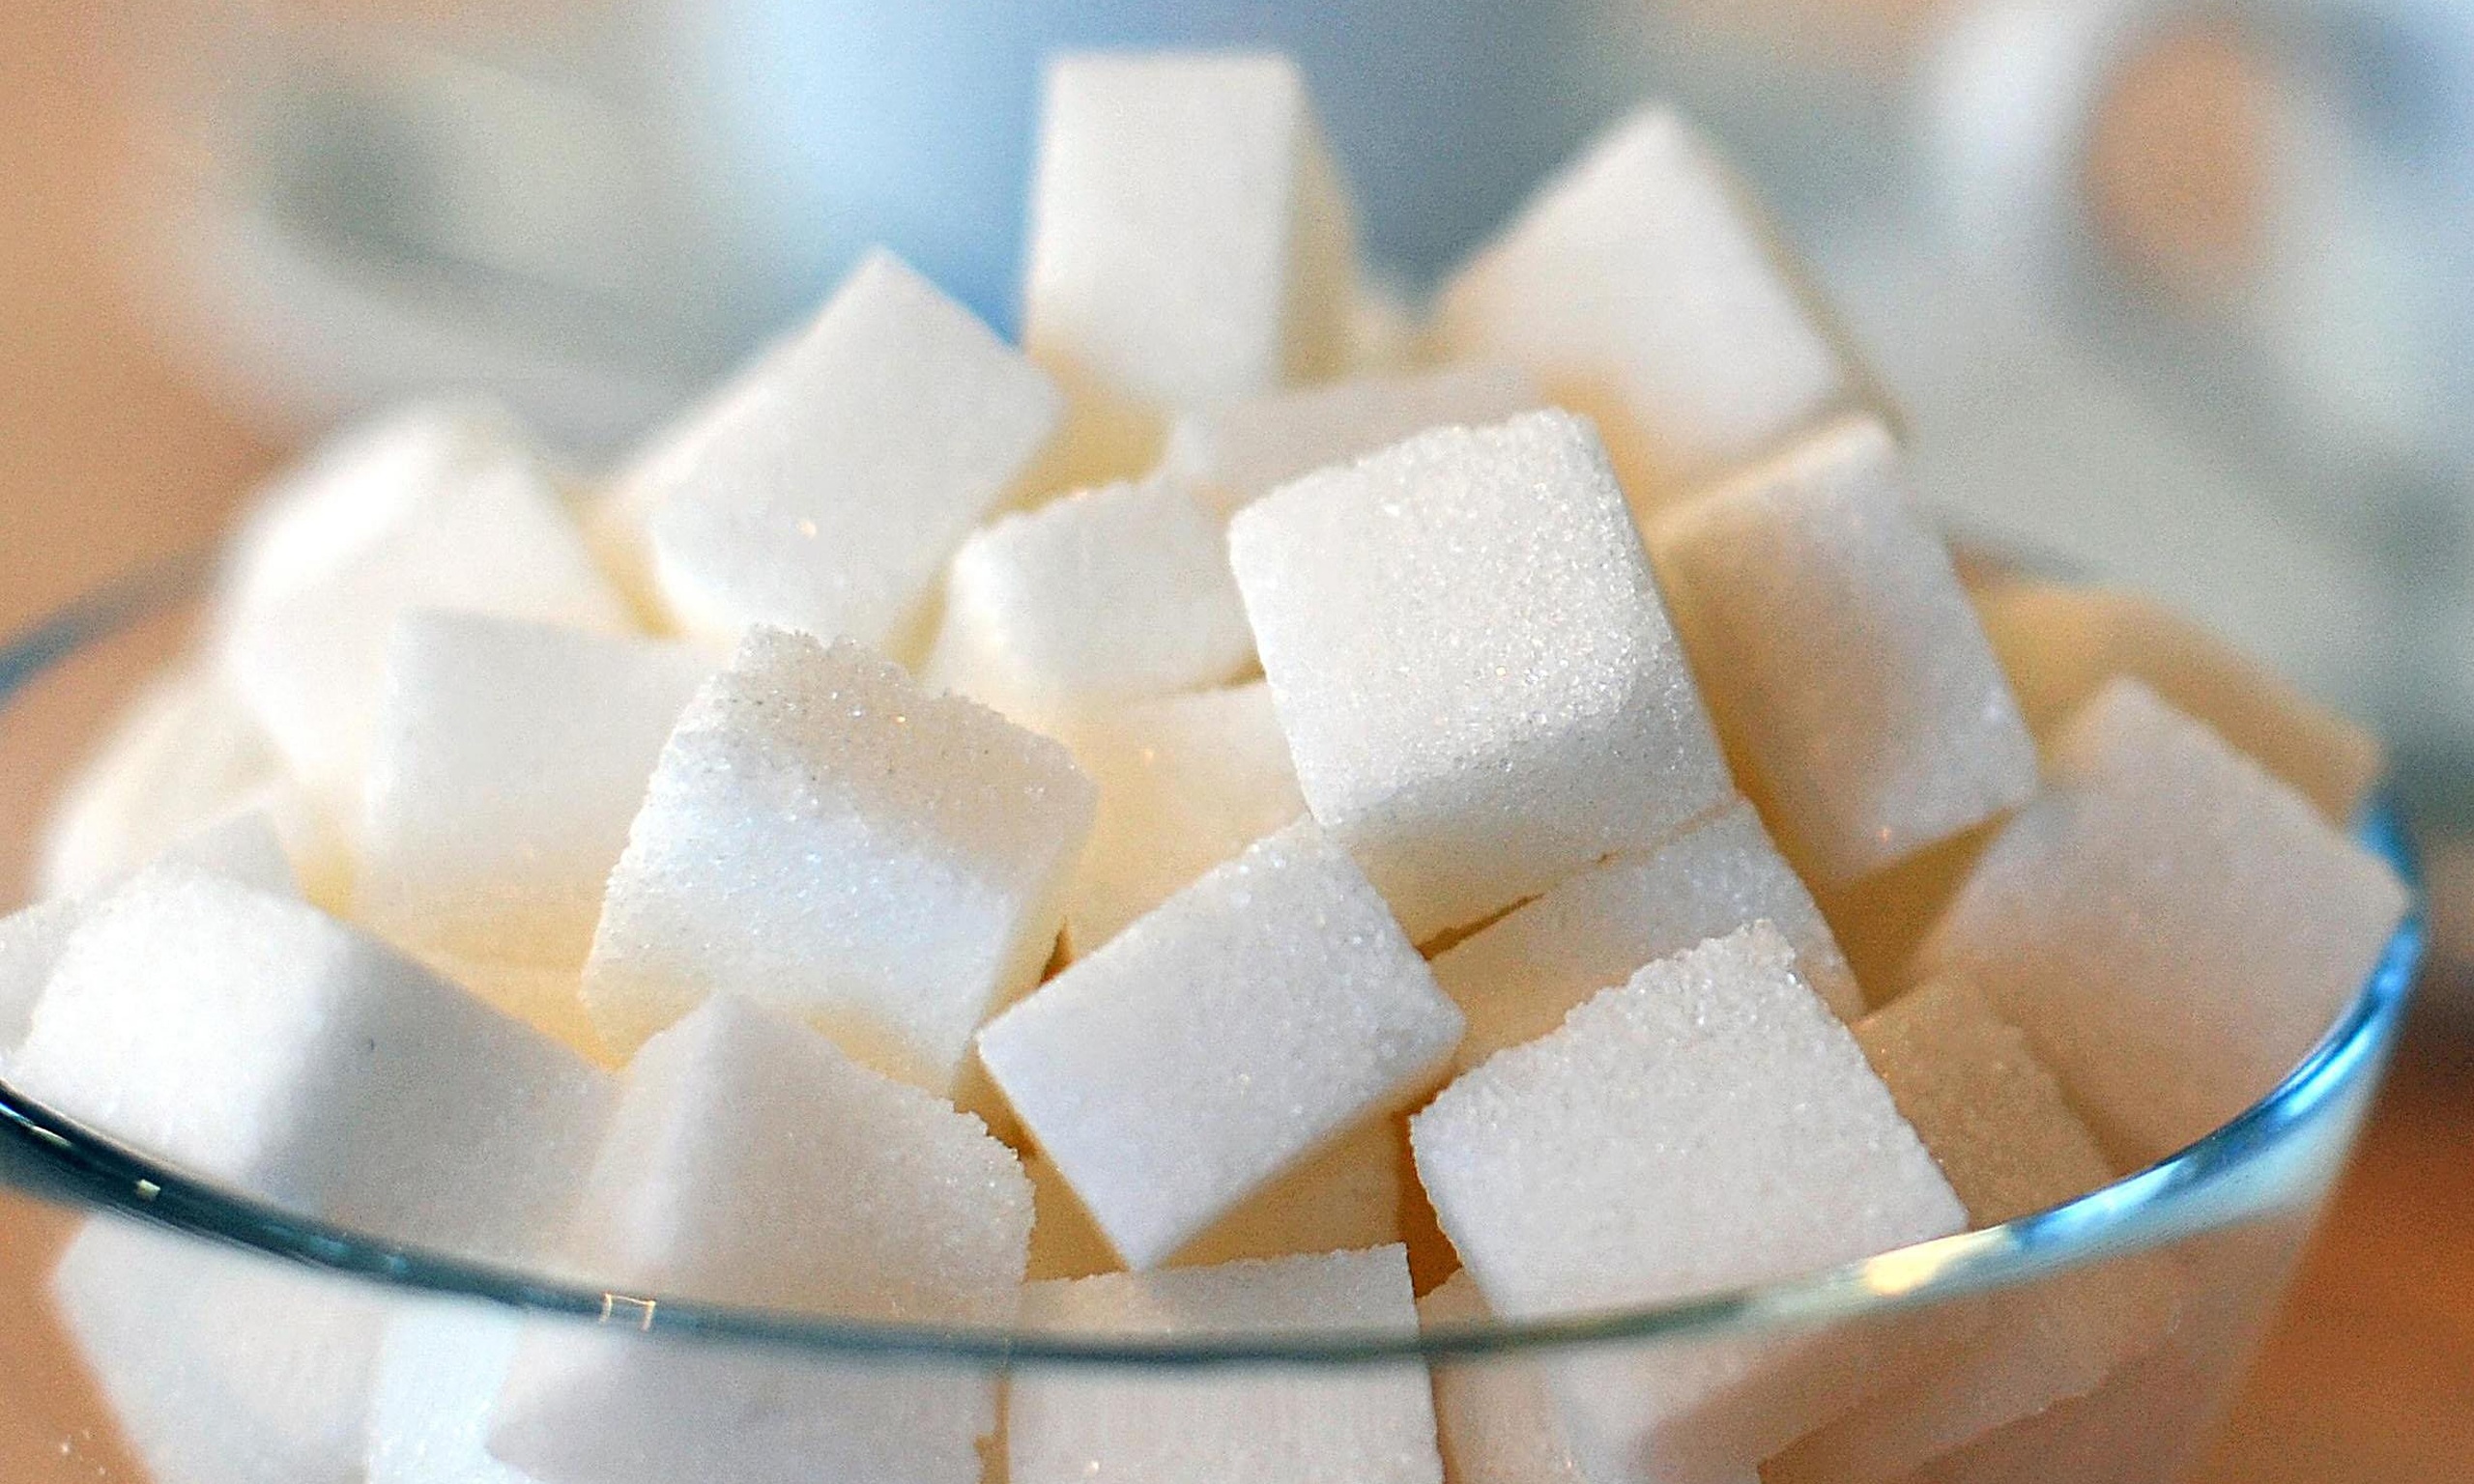 Adults Should Cut Sugar Intake To Less Than A Can Of Coke | Free ...